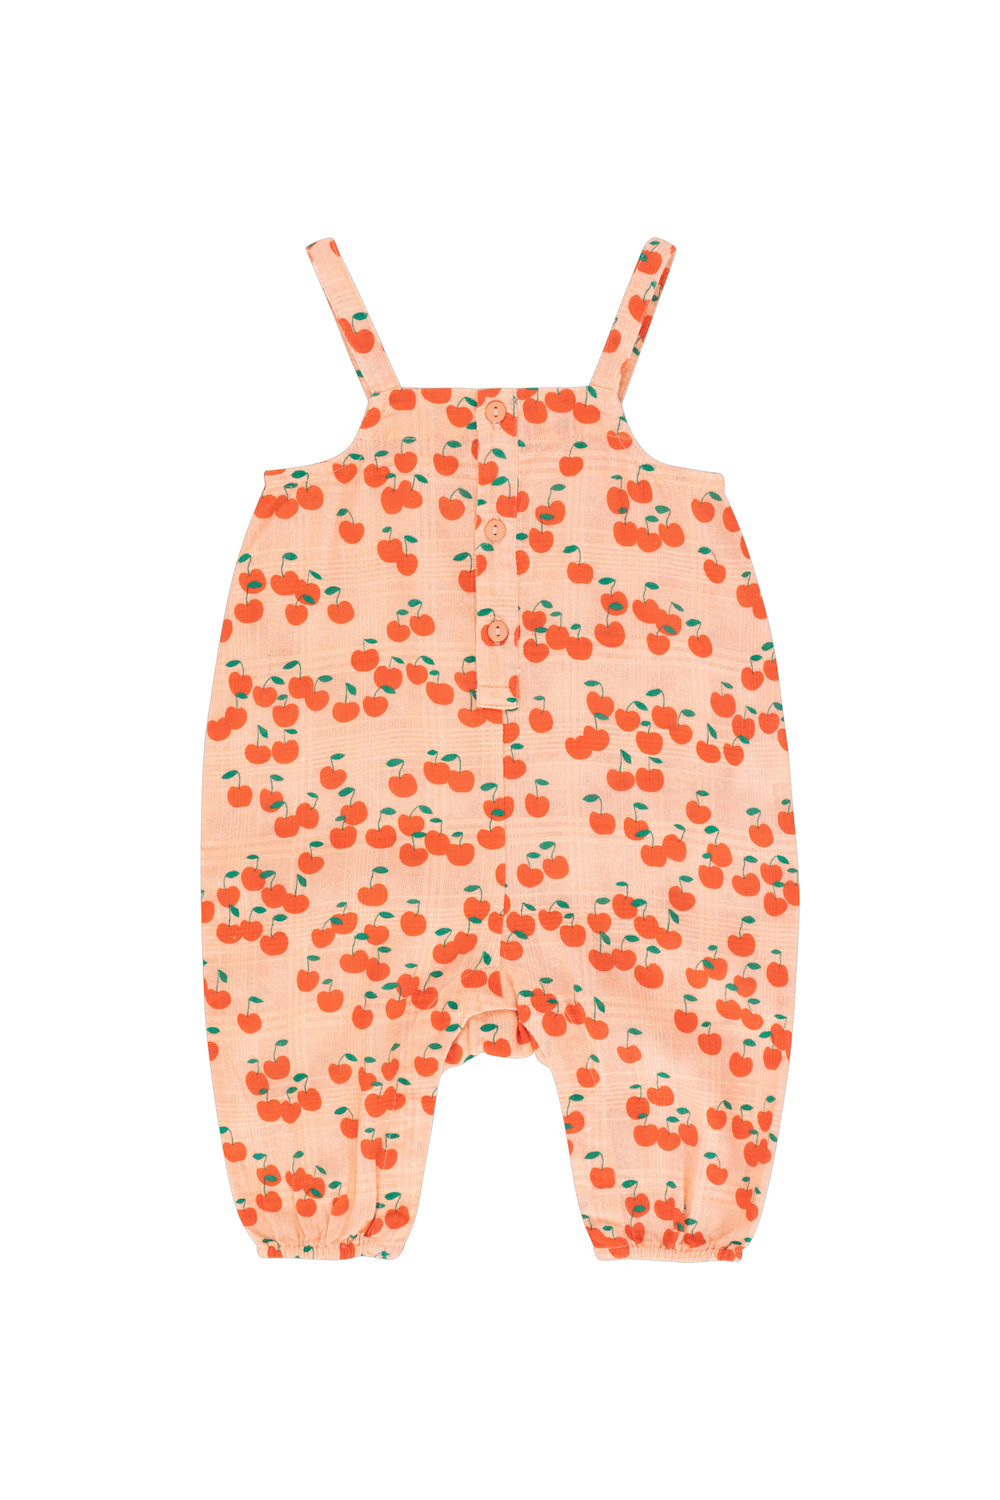 Tiny Cottons Cherries One-Piece - Papaya/Summer Red